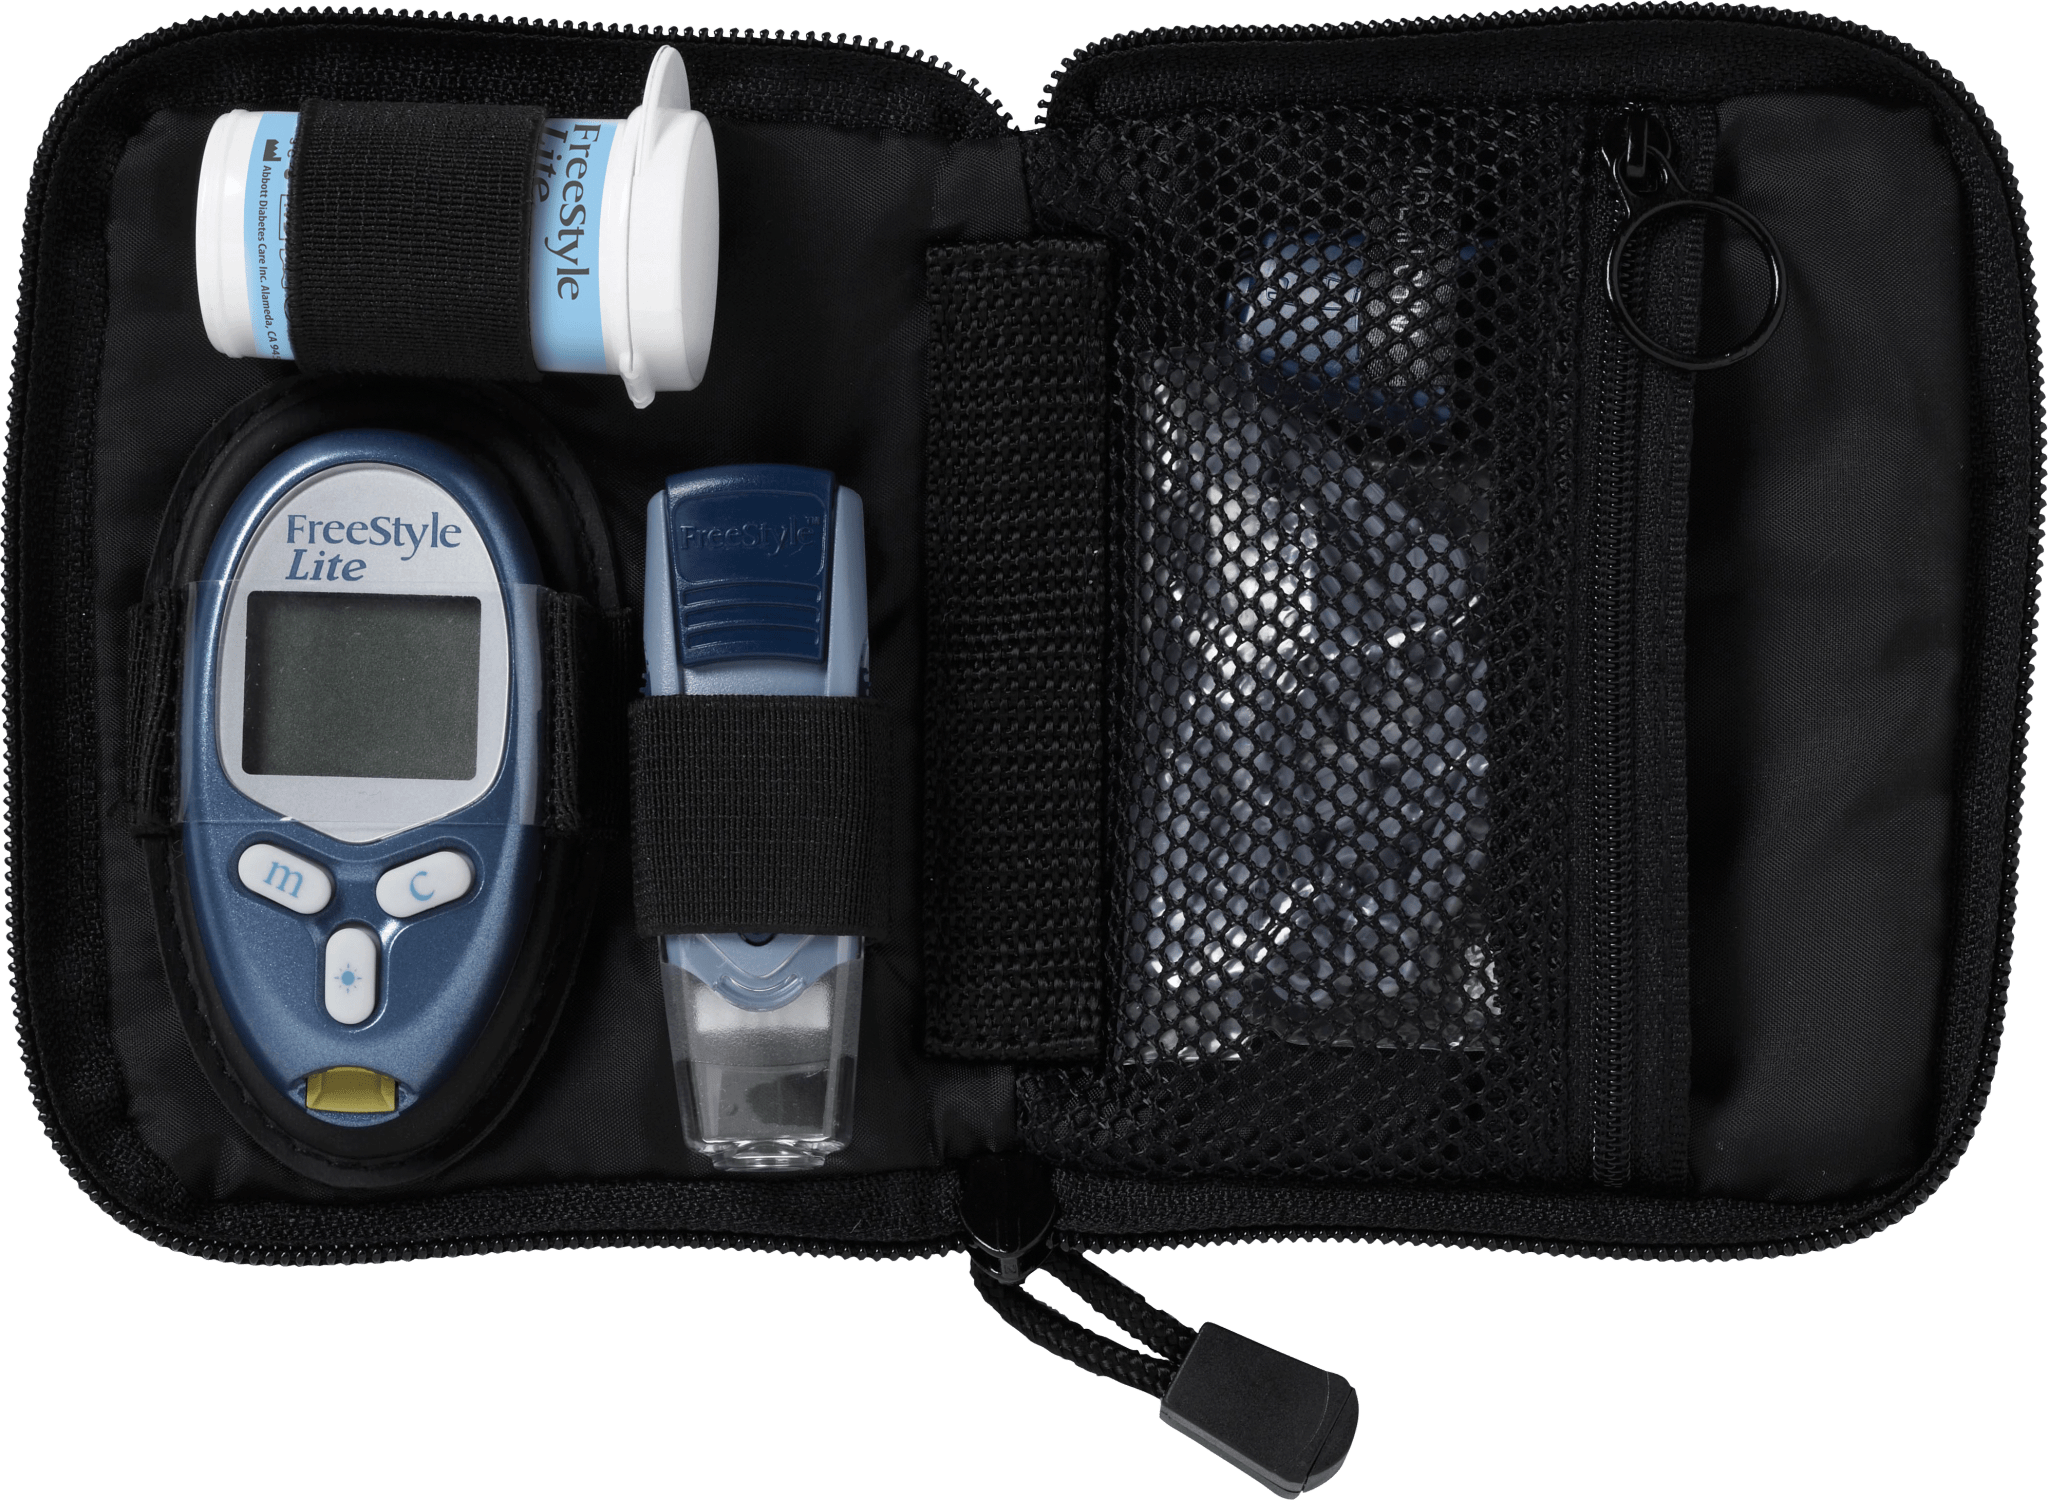 EA/1 - Abbott Freestyle Lite Blood Glucose Monitoring System, Innovative Automatic Calibration - Best Buy Medical Supplies